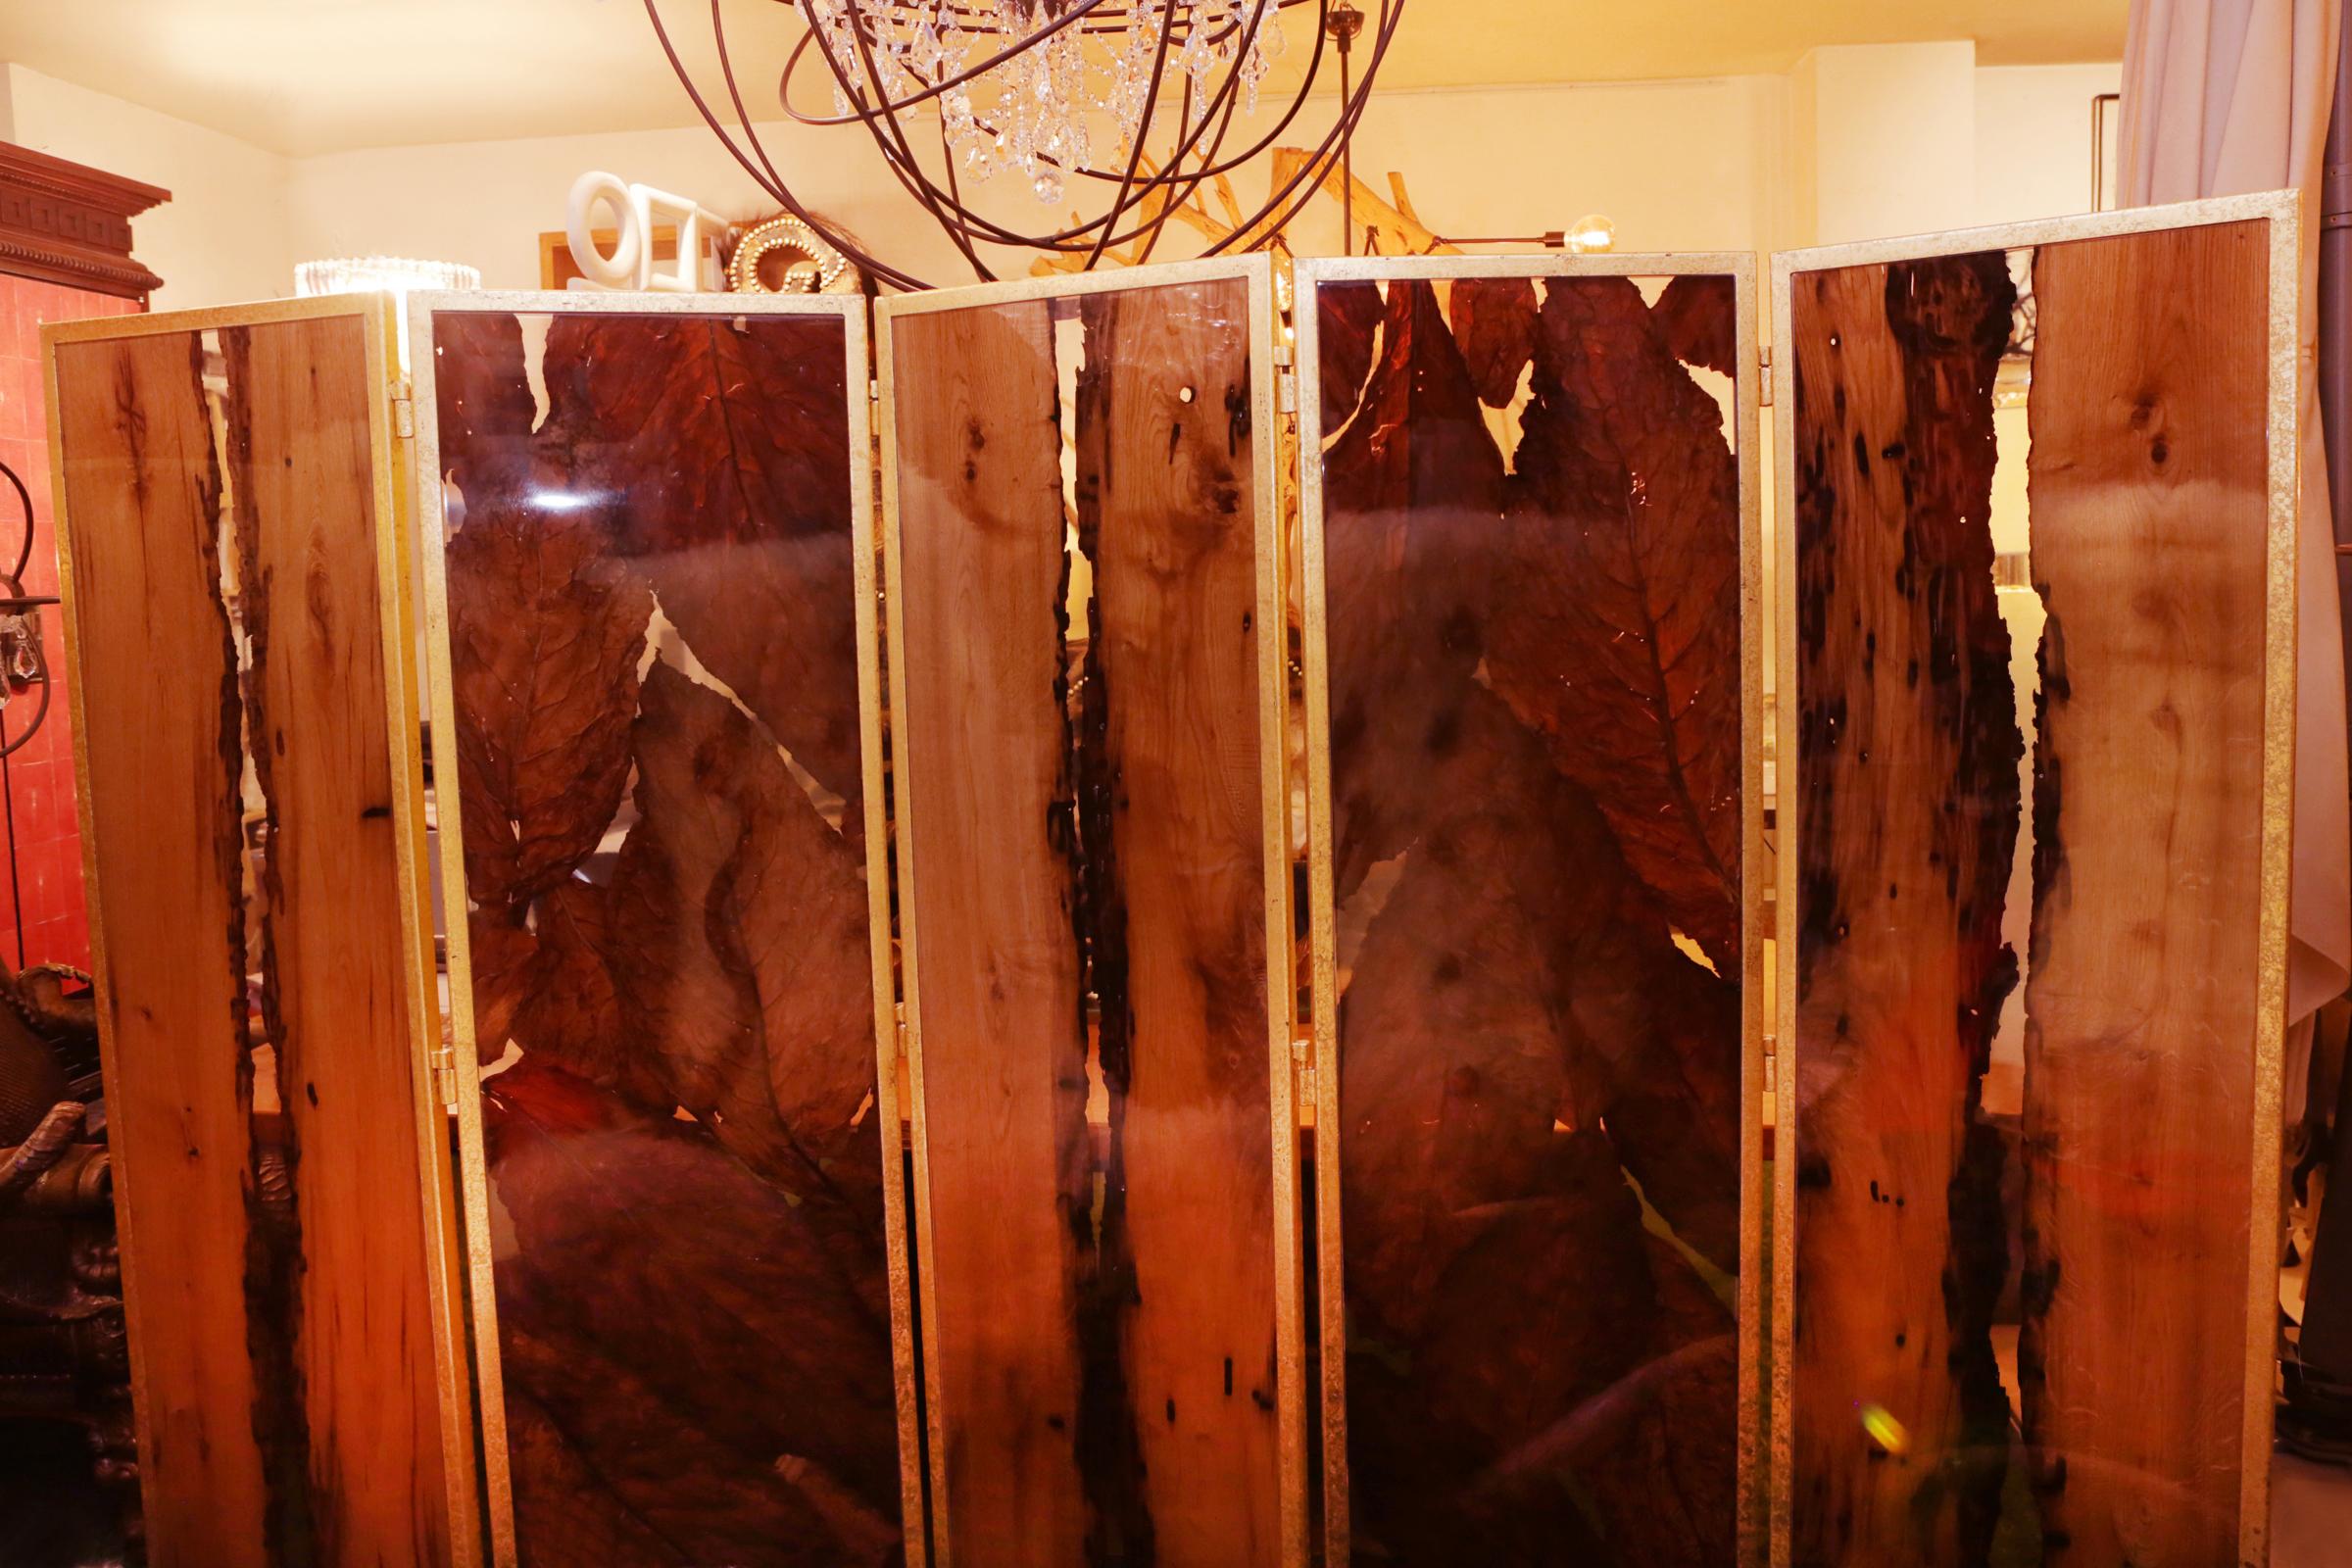 Folding screen bricole and tobacco leaves with resin,
all handcrafted with 5 metal gilded panels frame. With
3 panels in Venetian solid bricole wood taken in high
quality translucent resin and with 2 panels in Virginia
tobacco leaves taken in